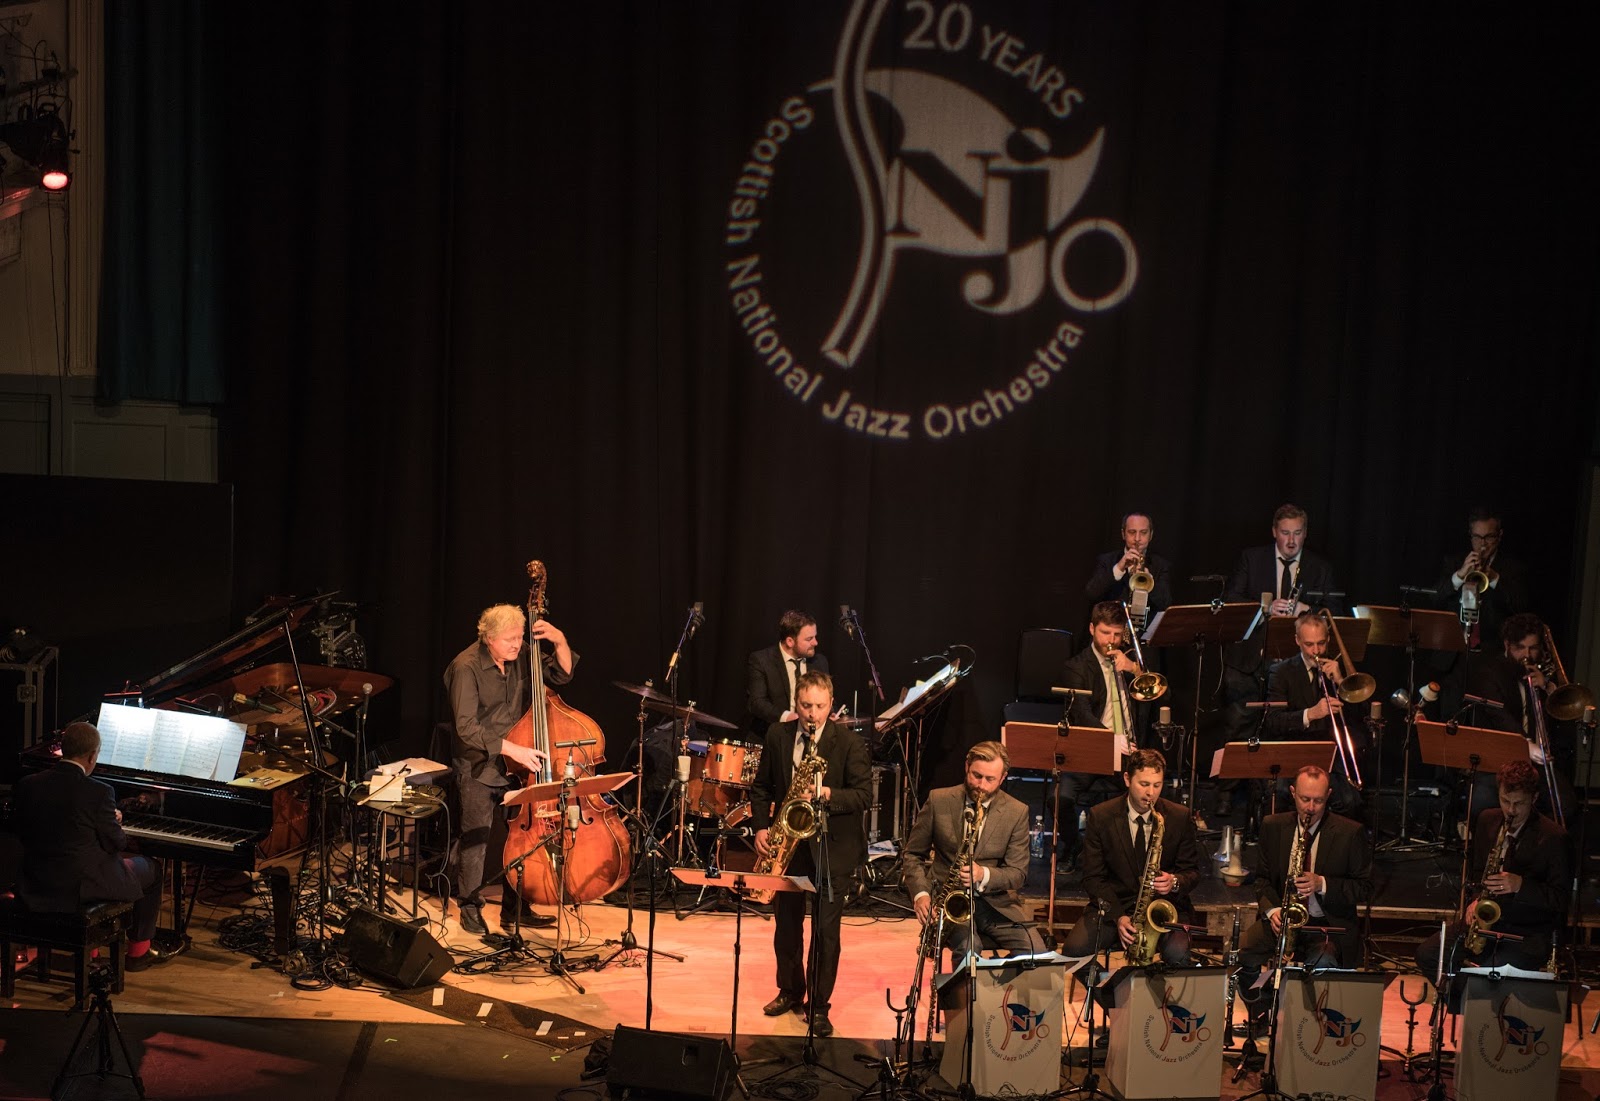 Scottish National Jazz Orchestra: The Legacy of Charles Mingus featuring Arild Andersen (Edynburg, Queen's Hall - 23.09.2016)